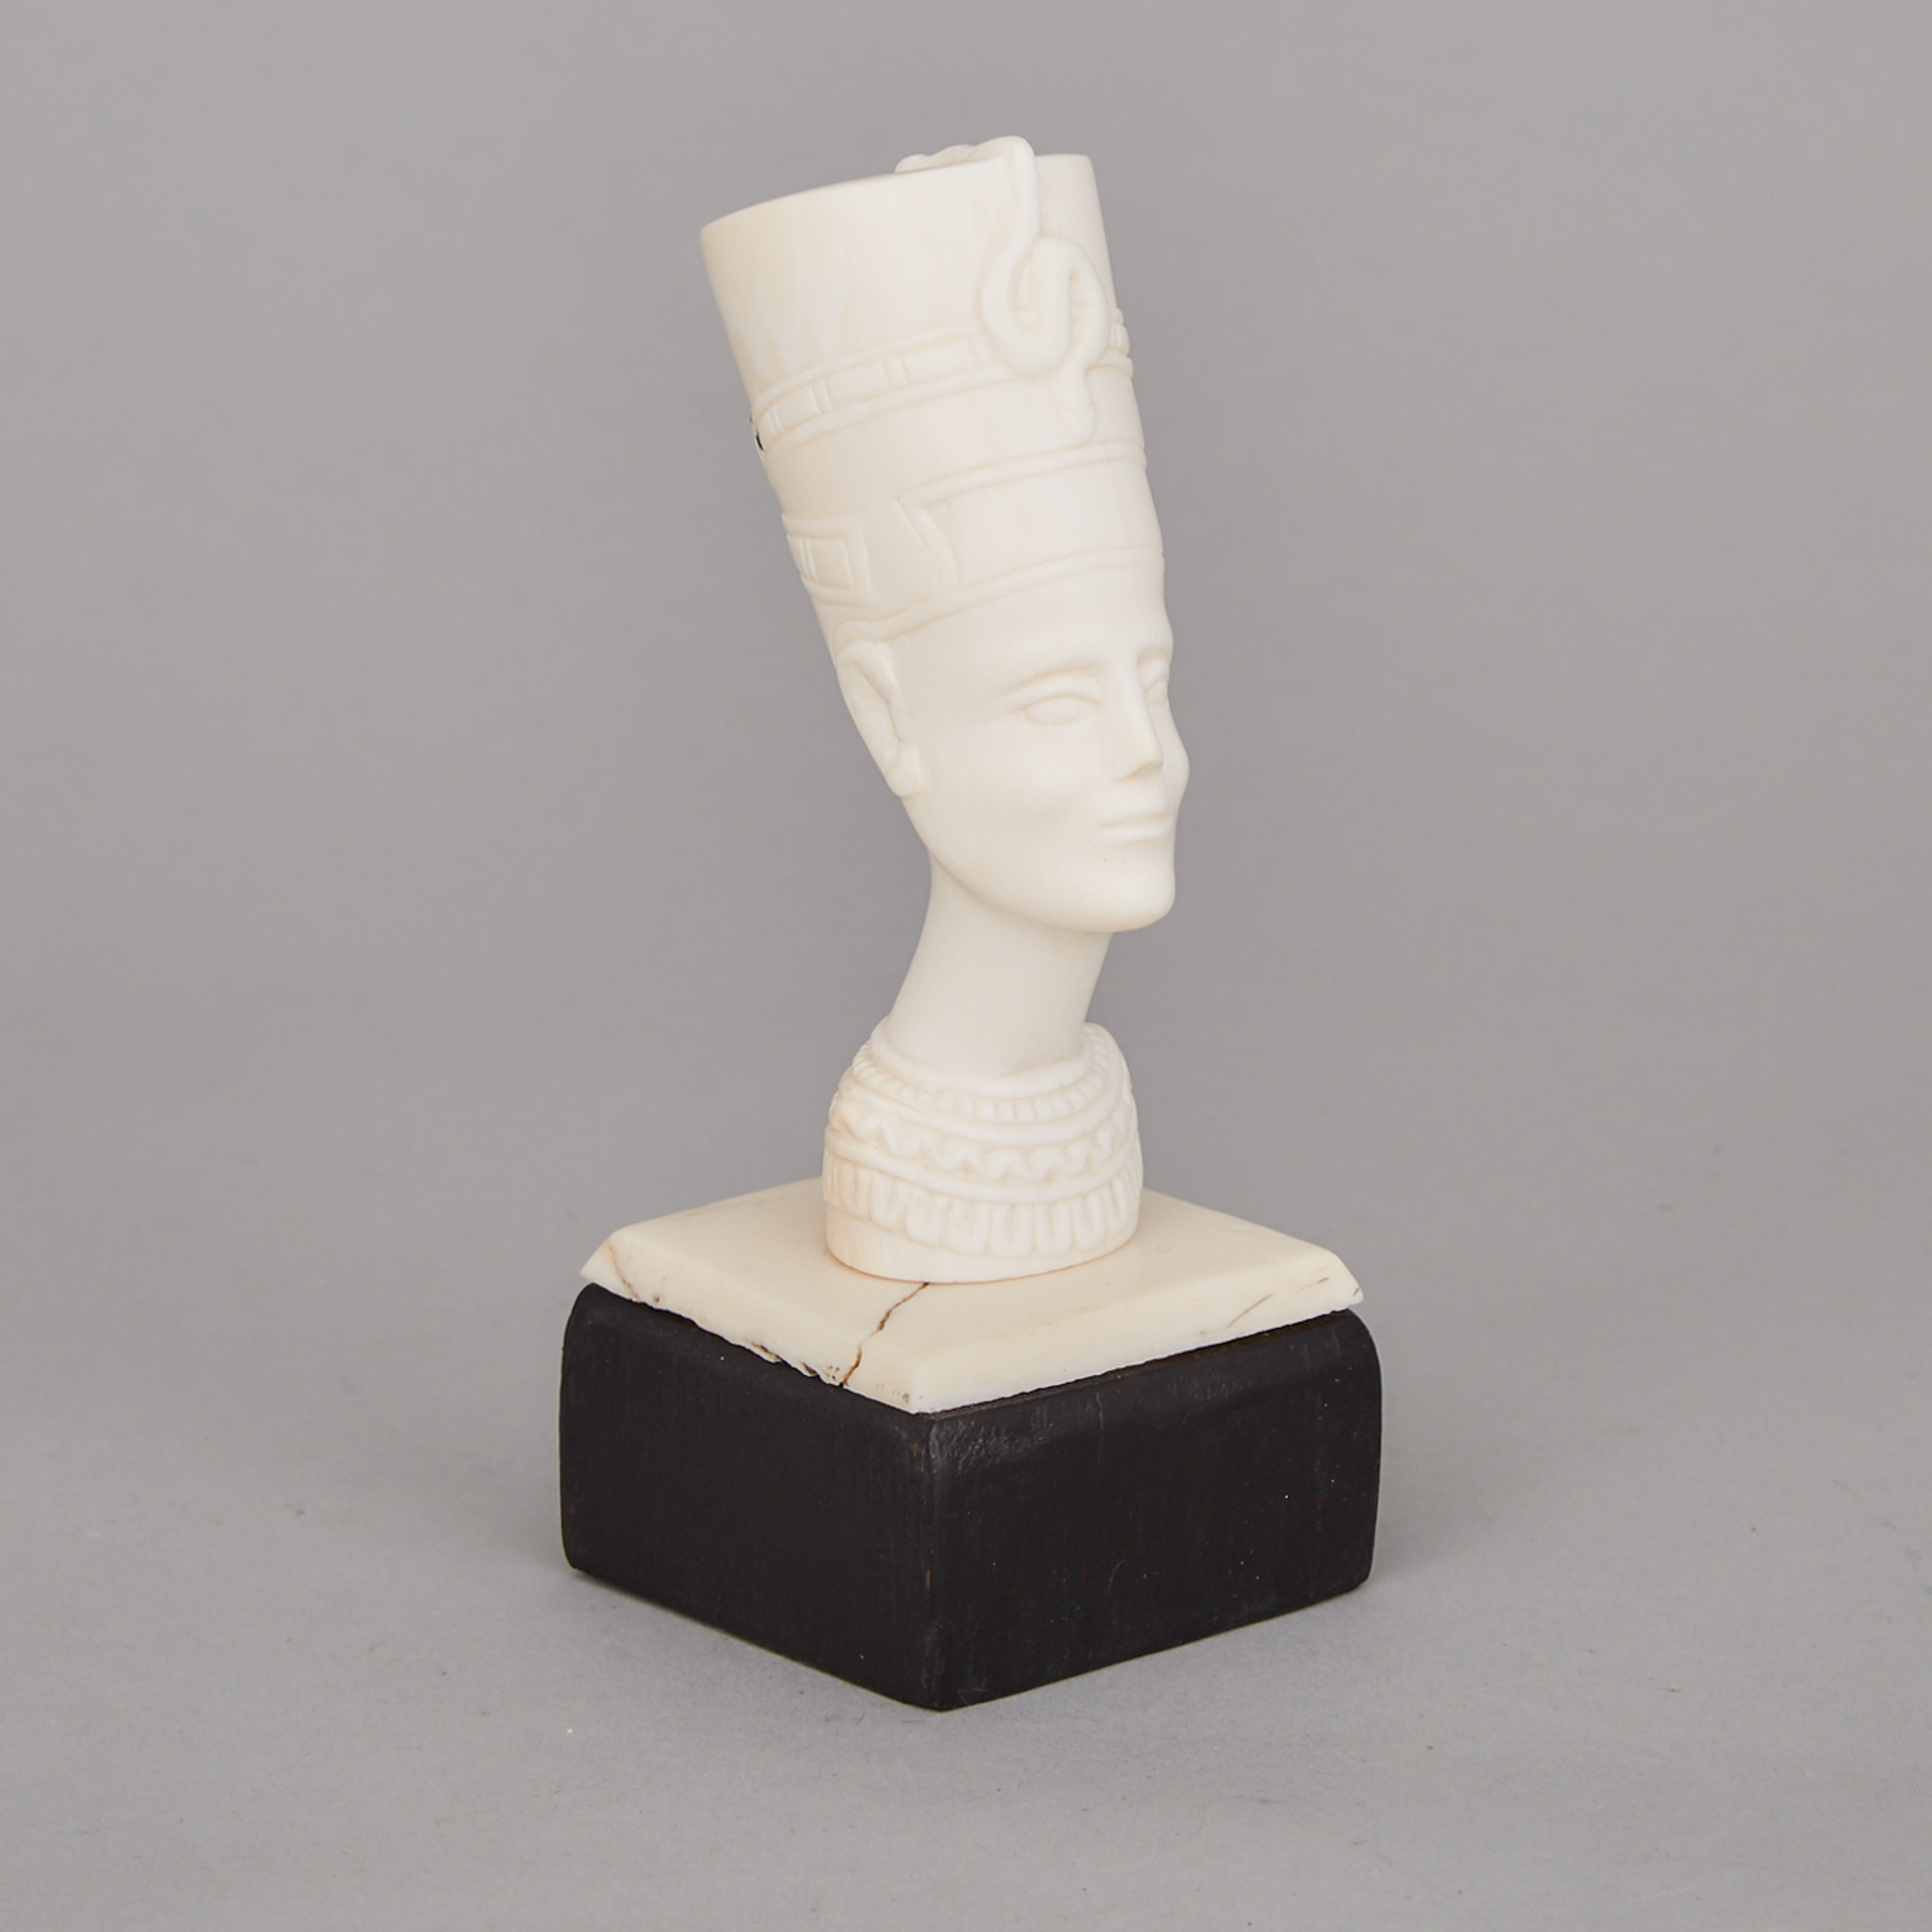 Carved Ivory Reduction of the Nefertiti Bust, early-mid 20th century